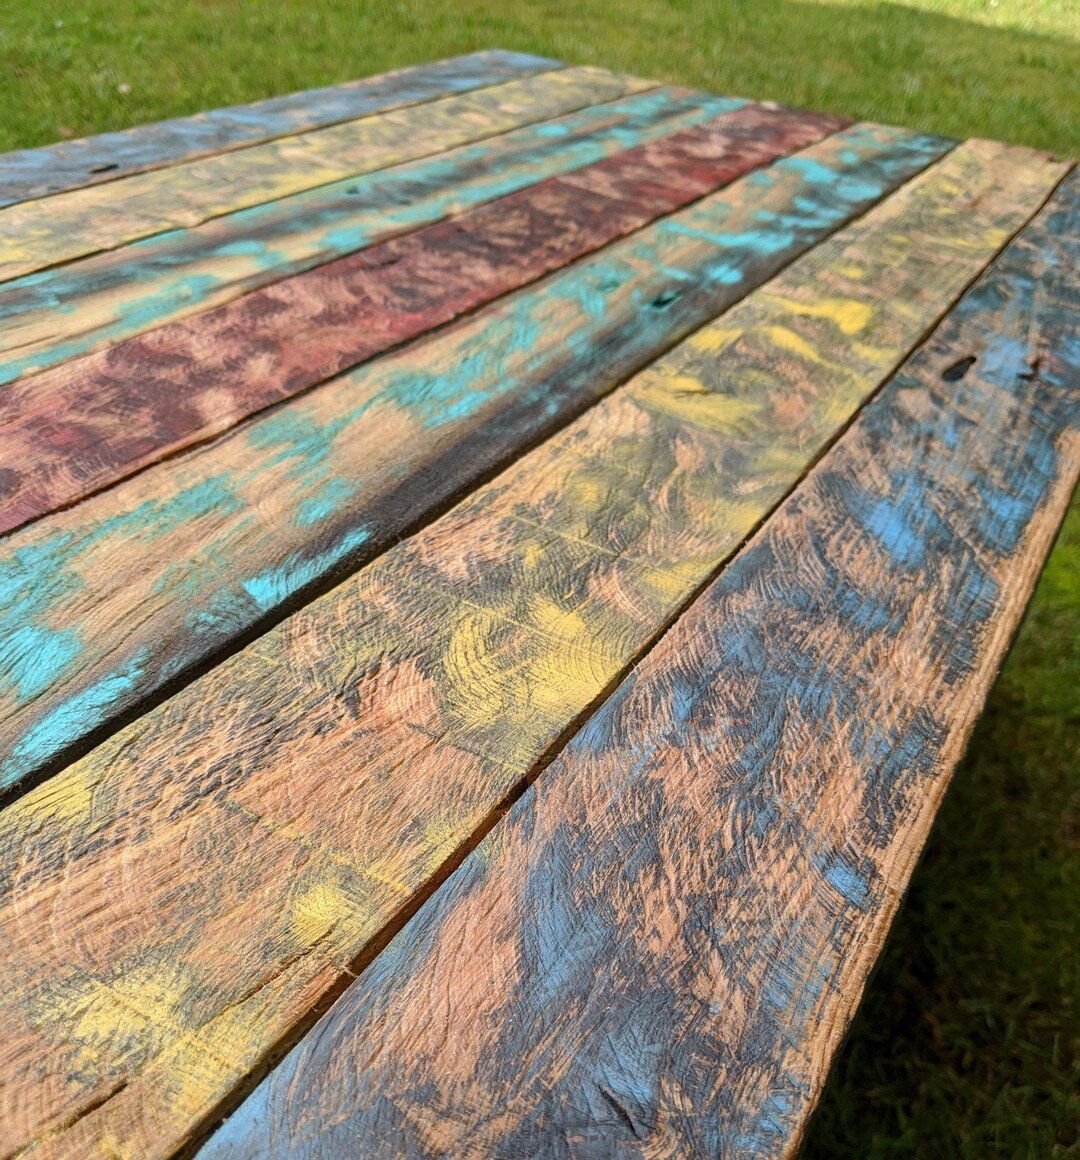 We loved how this custom project turned out so we decided to make it a limited offering on our Etsy page (and soon to be added to our website). Let us know what you think! ⠀
.⠀
.⠀
.⠀
#reclaimedwood #salvaged #reuse #shoplocal #choosereuse #customfurn